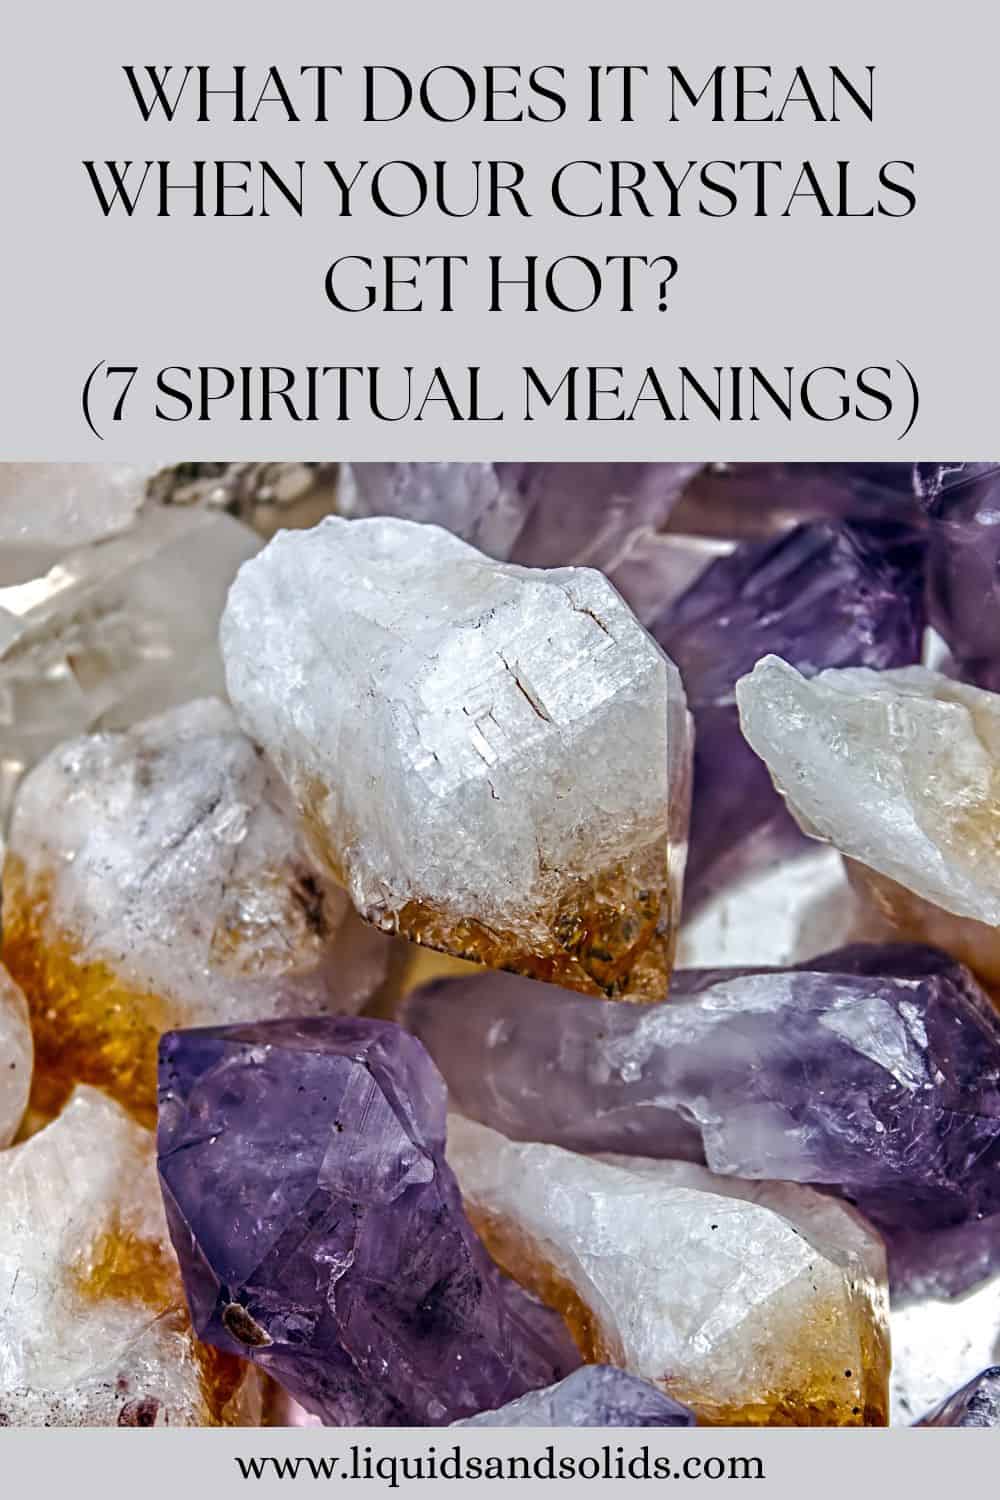 What Does It Mean When Your Crystals Get Hot? (7 Spiritual Meanings)